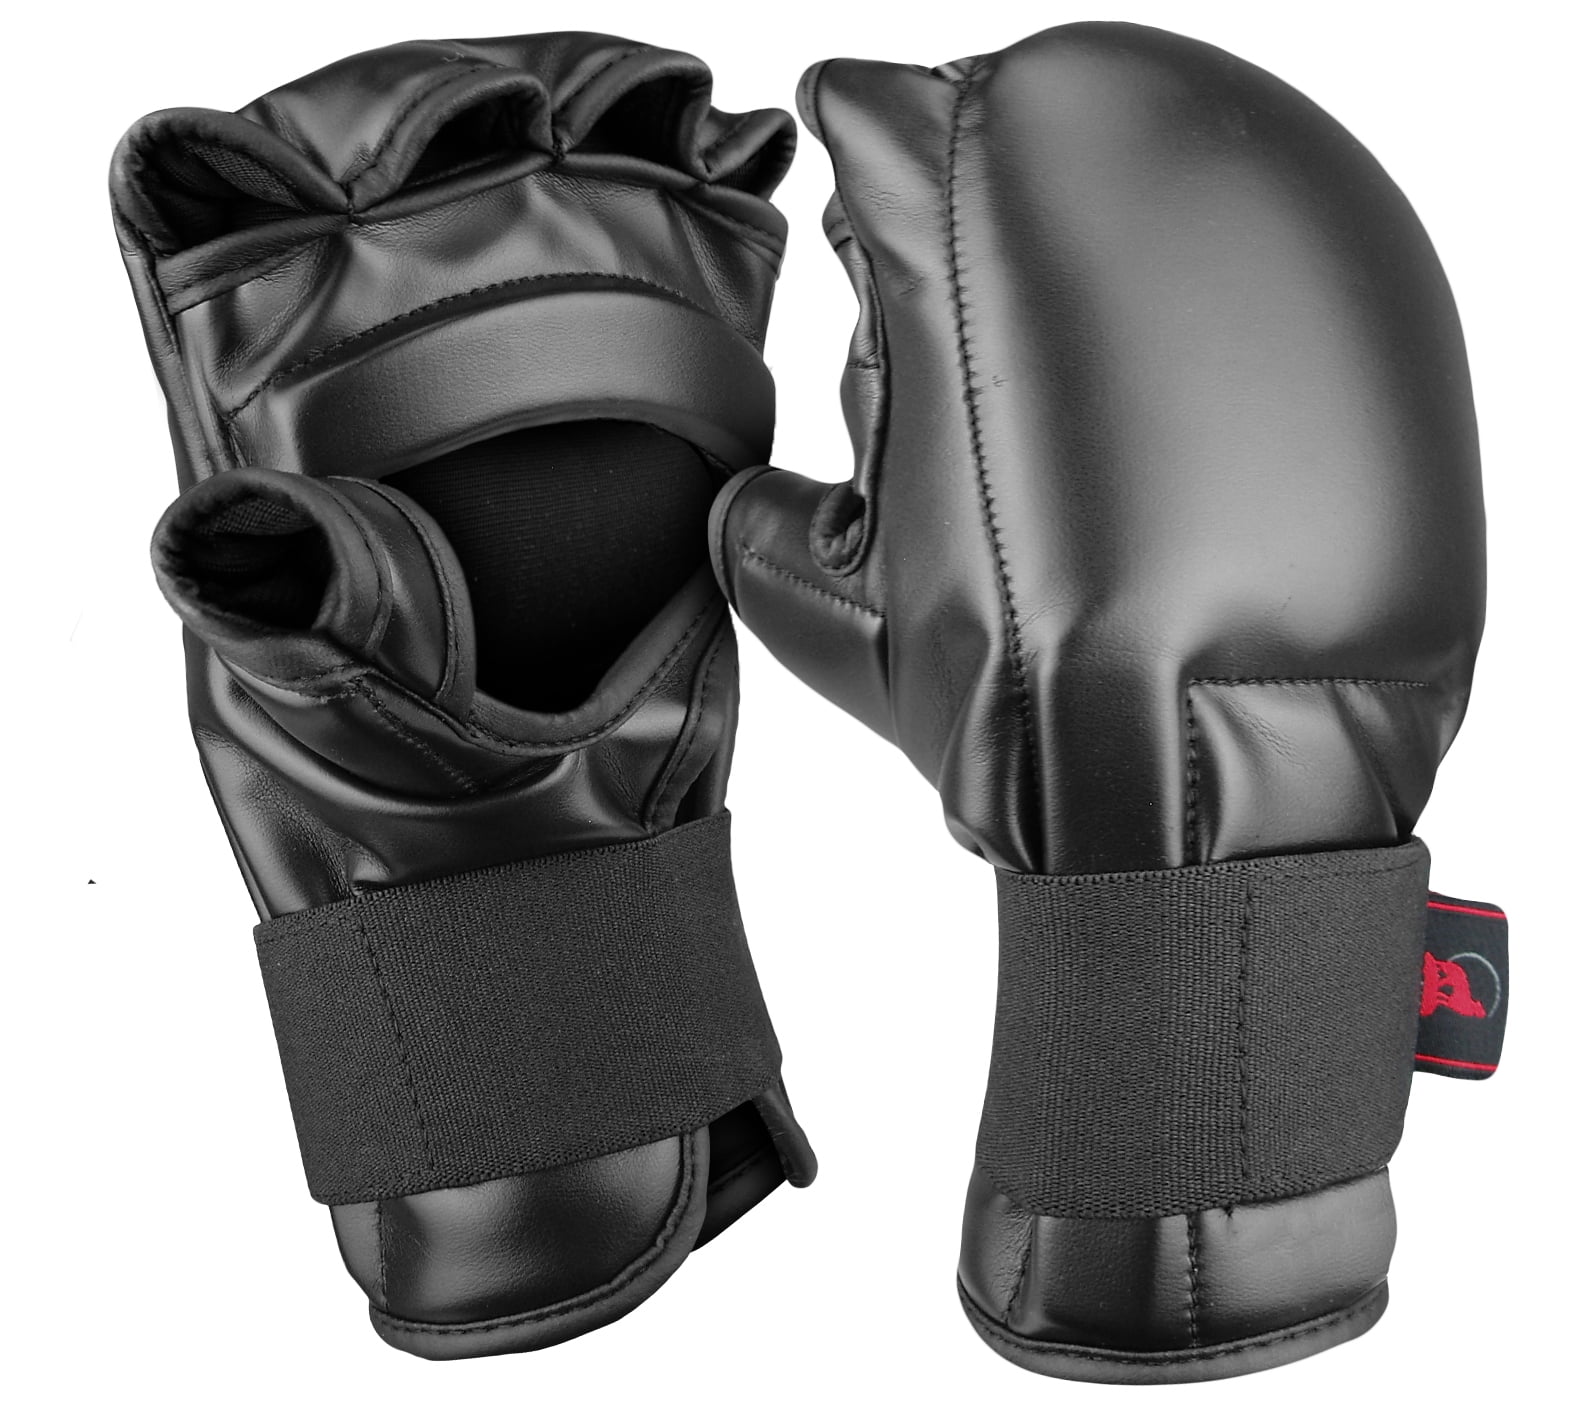 AKRON Boxing MMA Gloves UFC Grappling Training Punching Fighting Mitts Muay Thai 